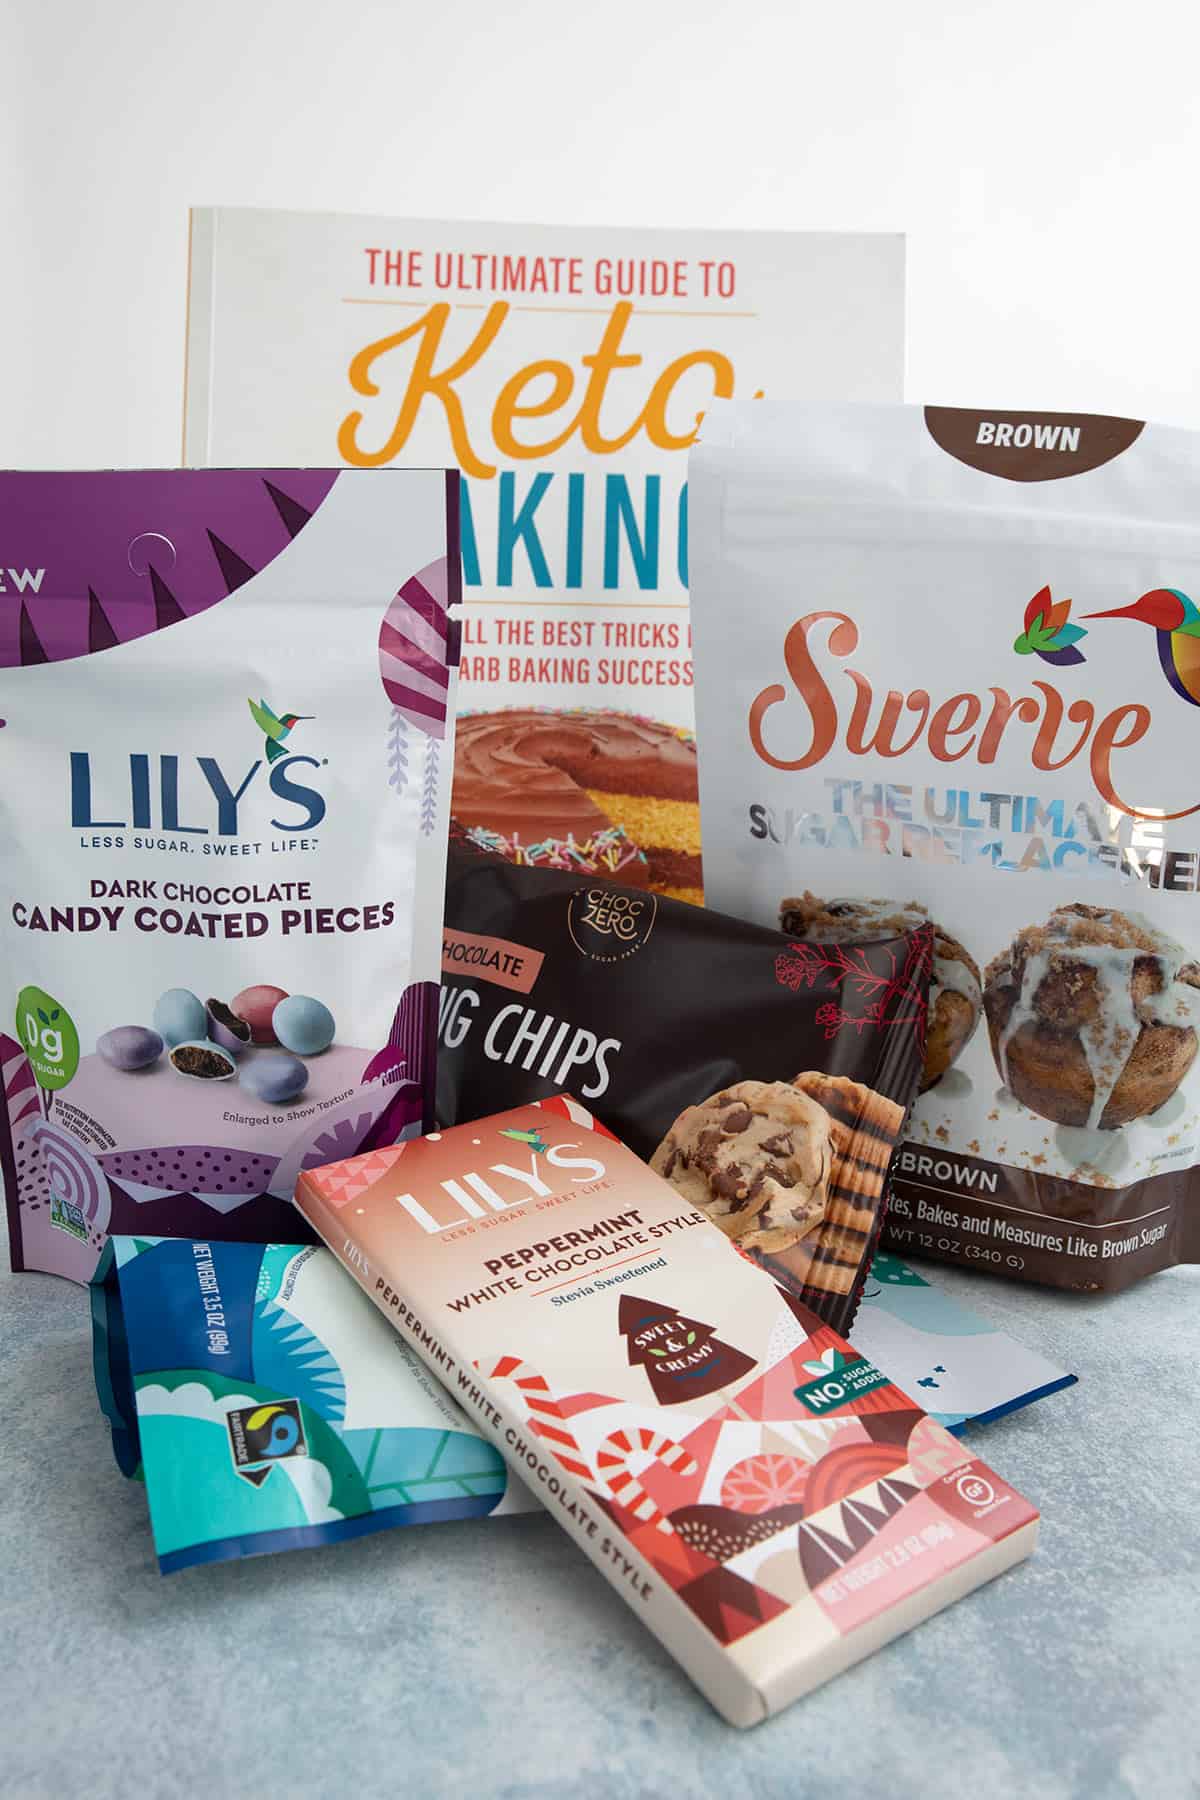 A photo of keto baking book and keto goodies for a giveaway box. 